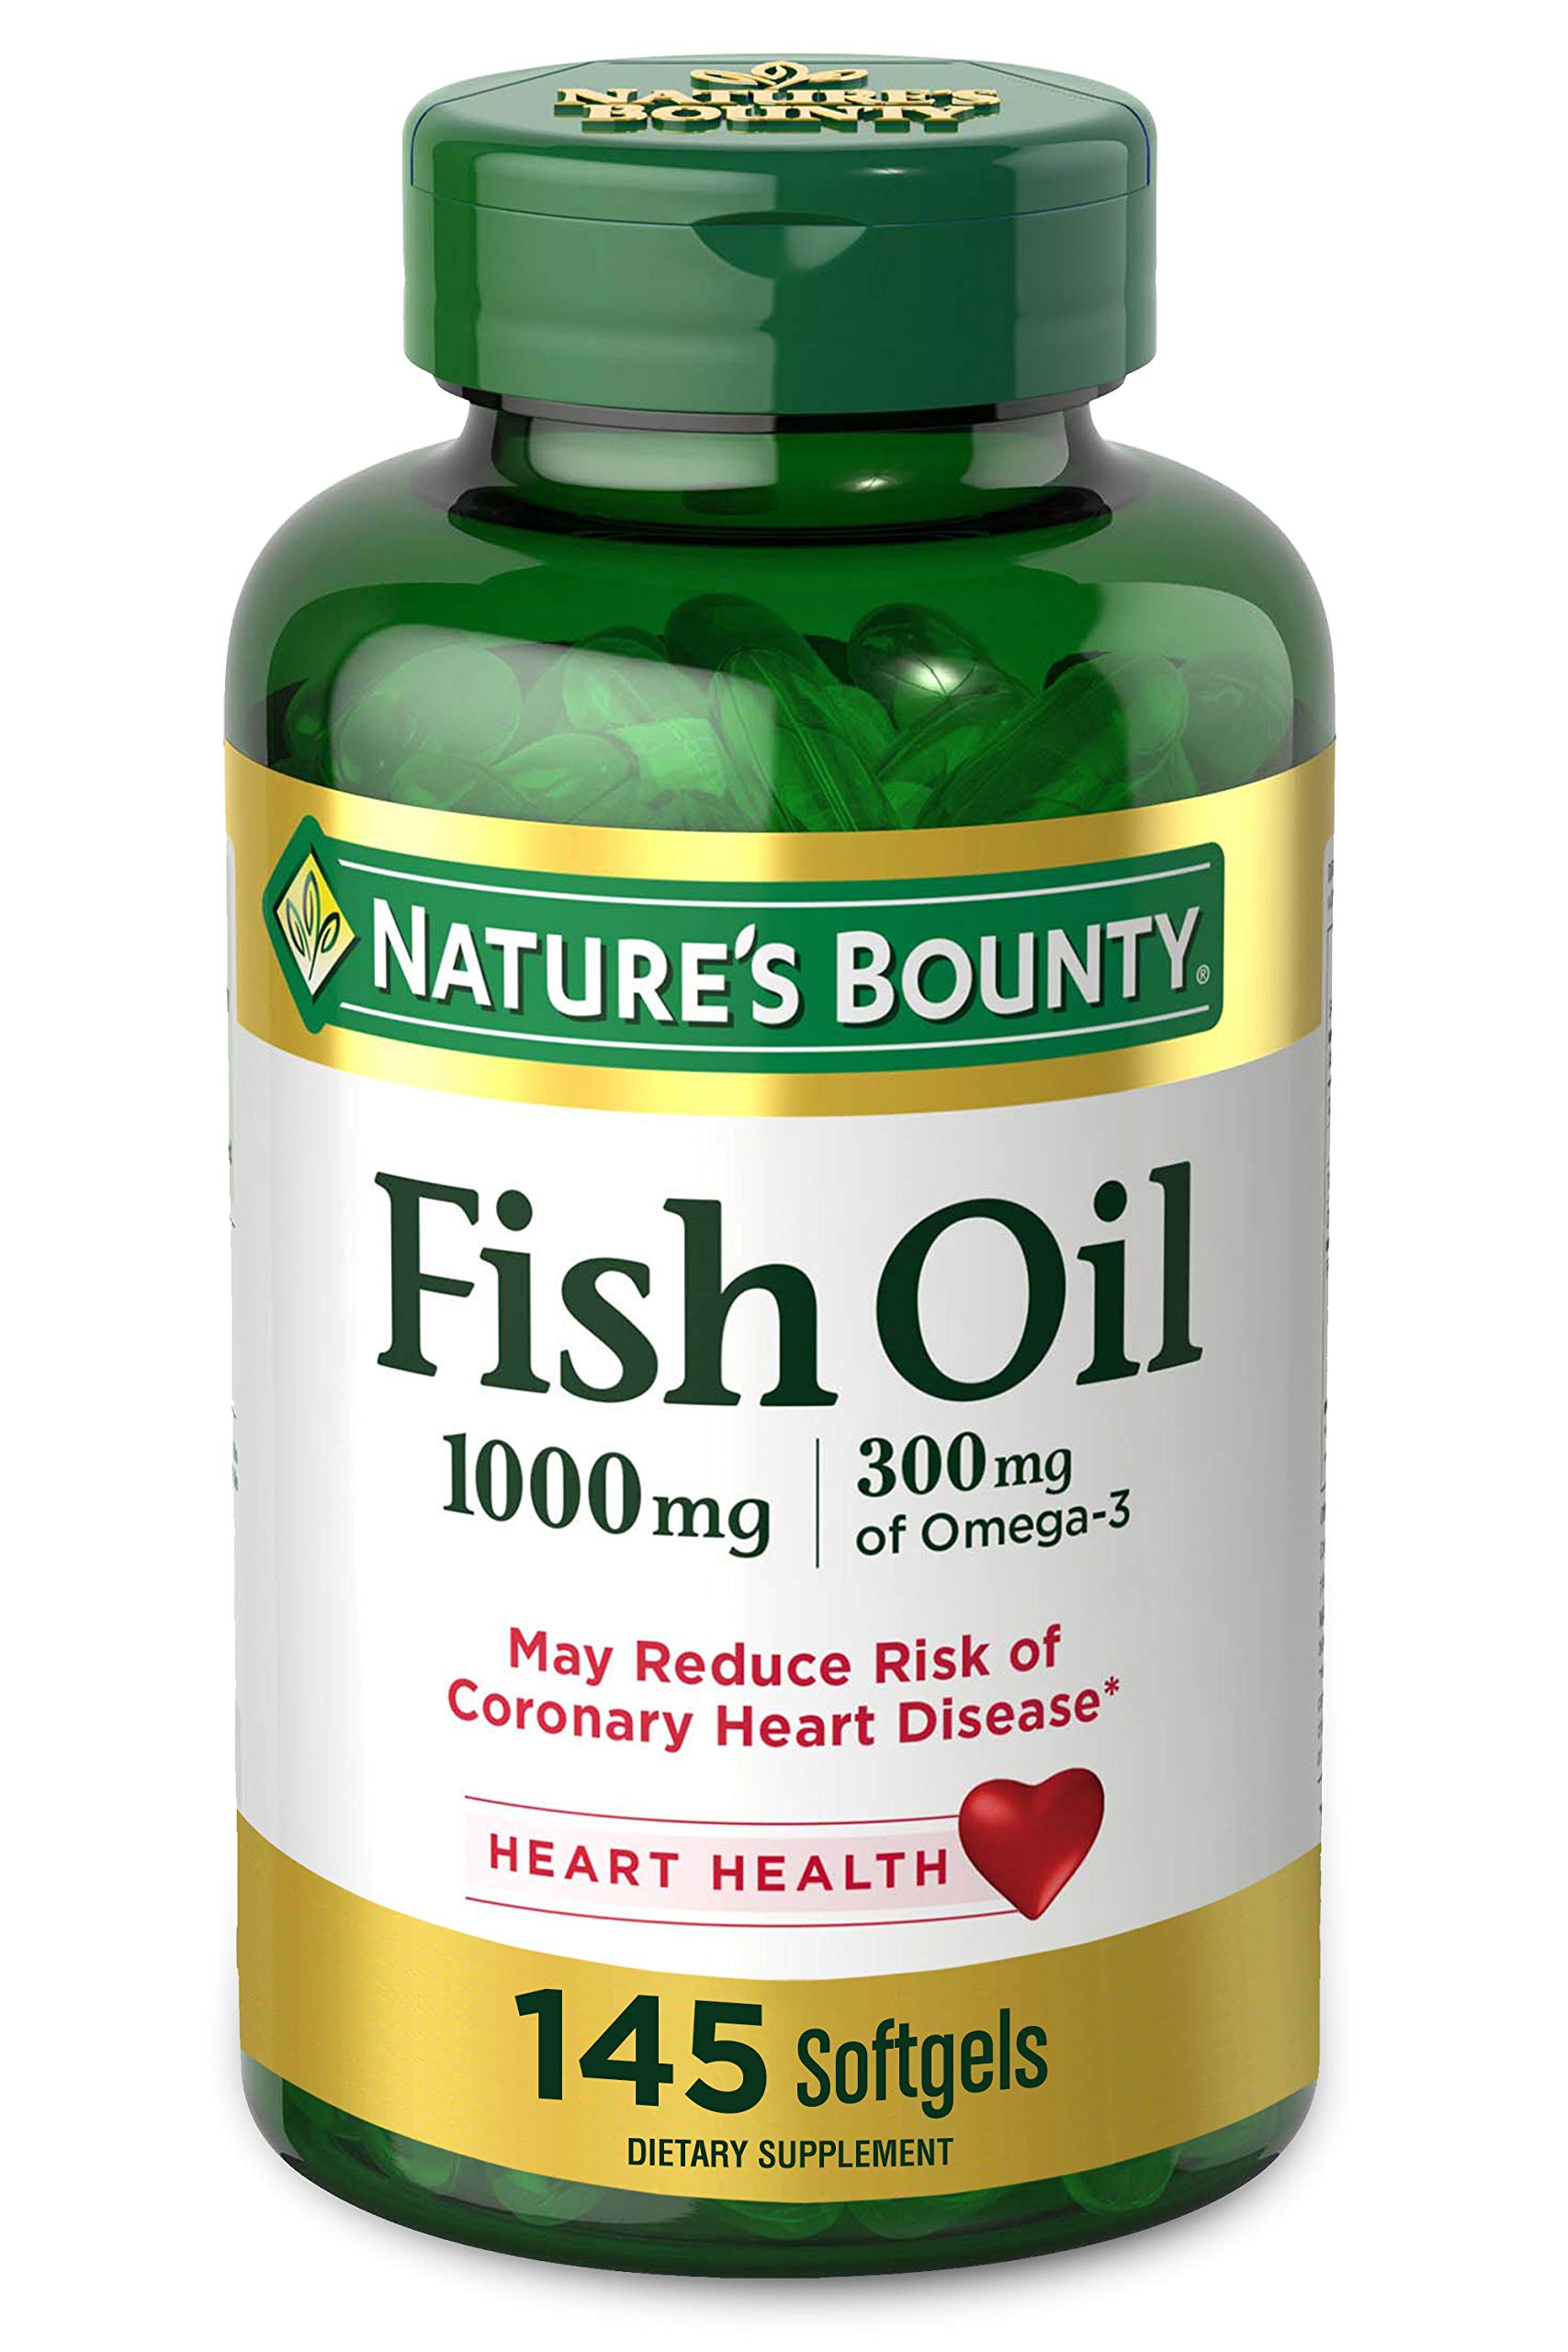 Nature's Bounty Fish Oil Omega-3 1000 mg Soft Gels, 145 Count